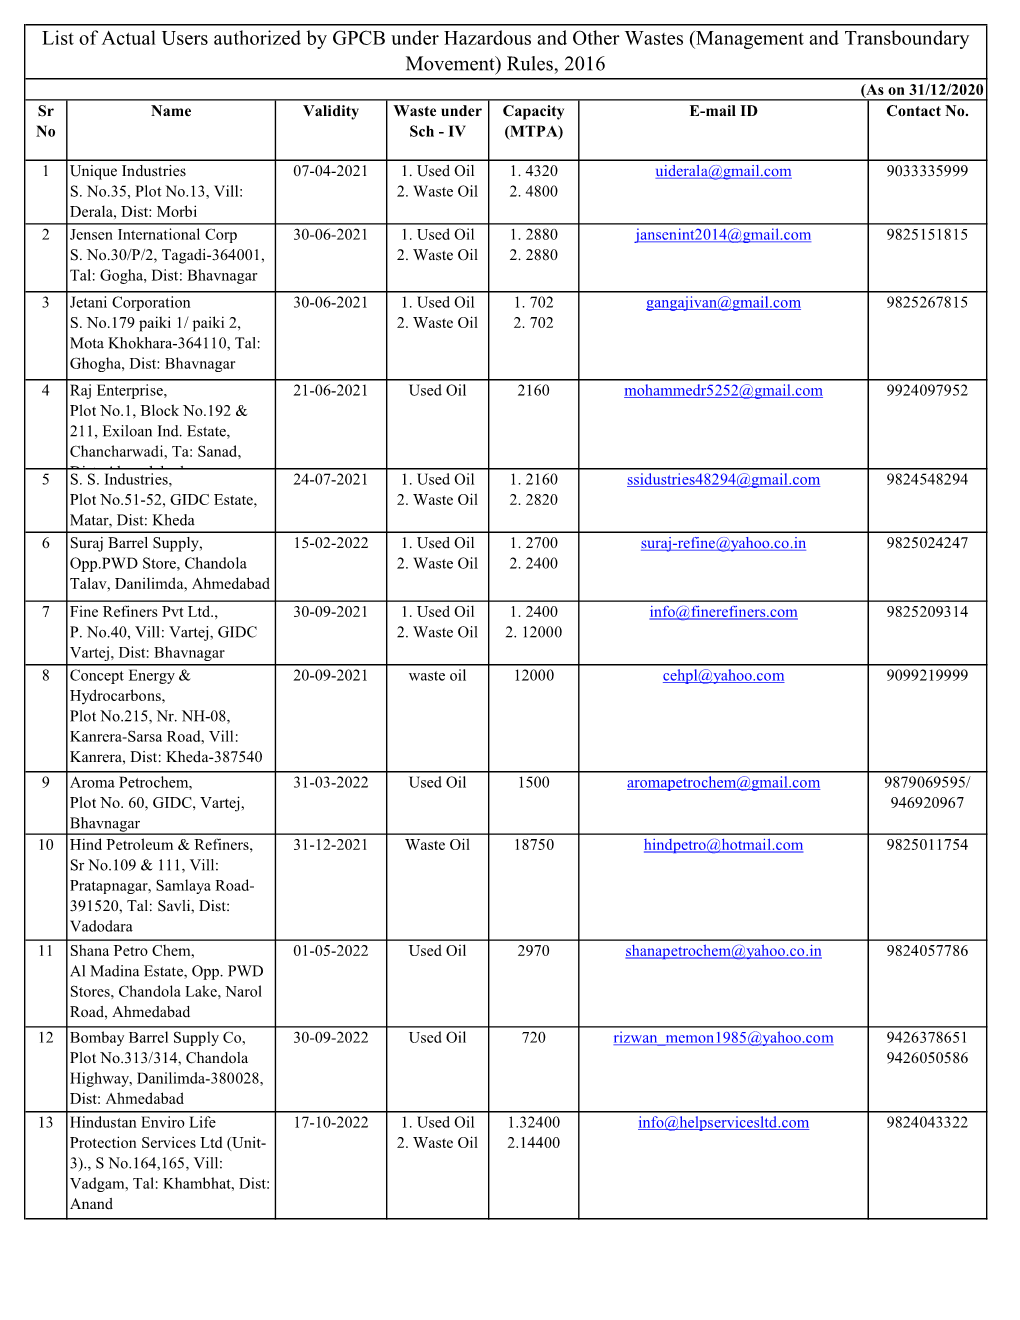 List of Actual Users Authorized by GPCB Under Hazardous and Other